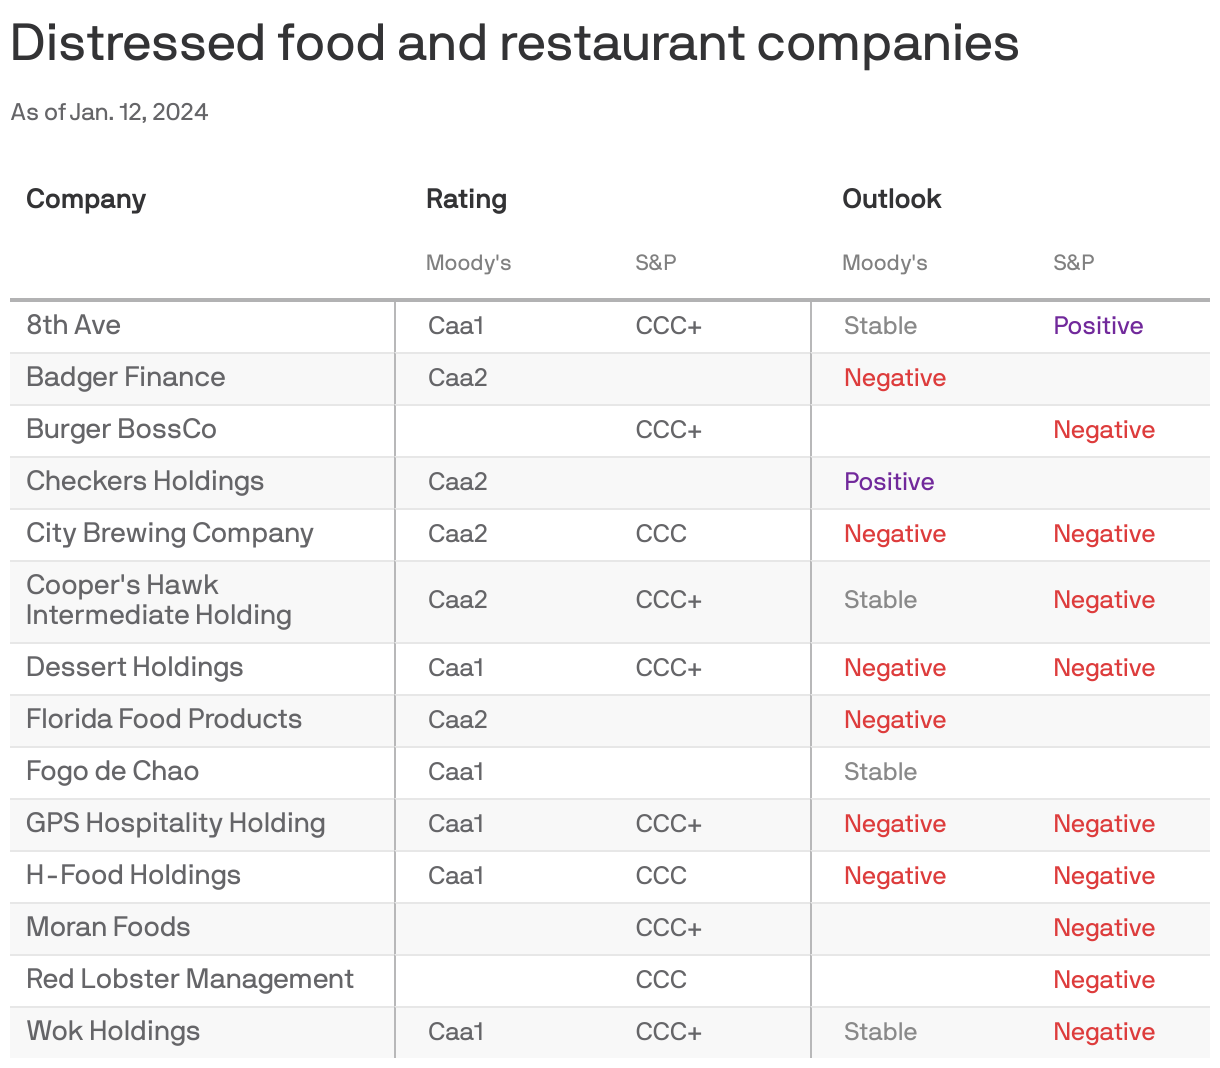 Consumer and retail companies were distressed last year